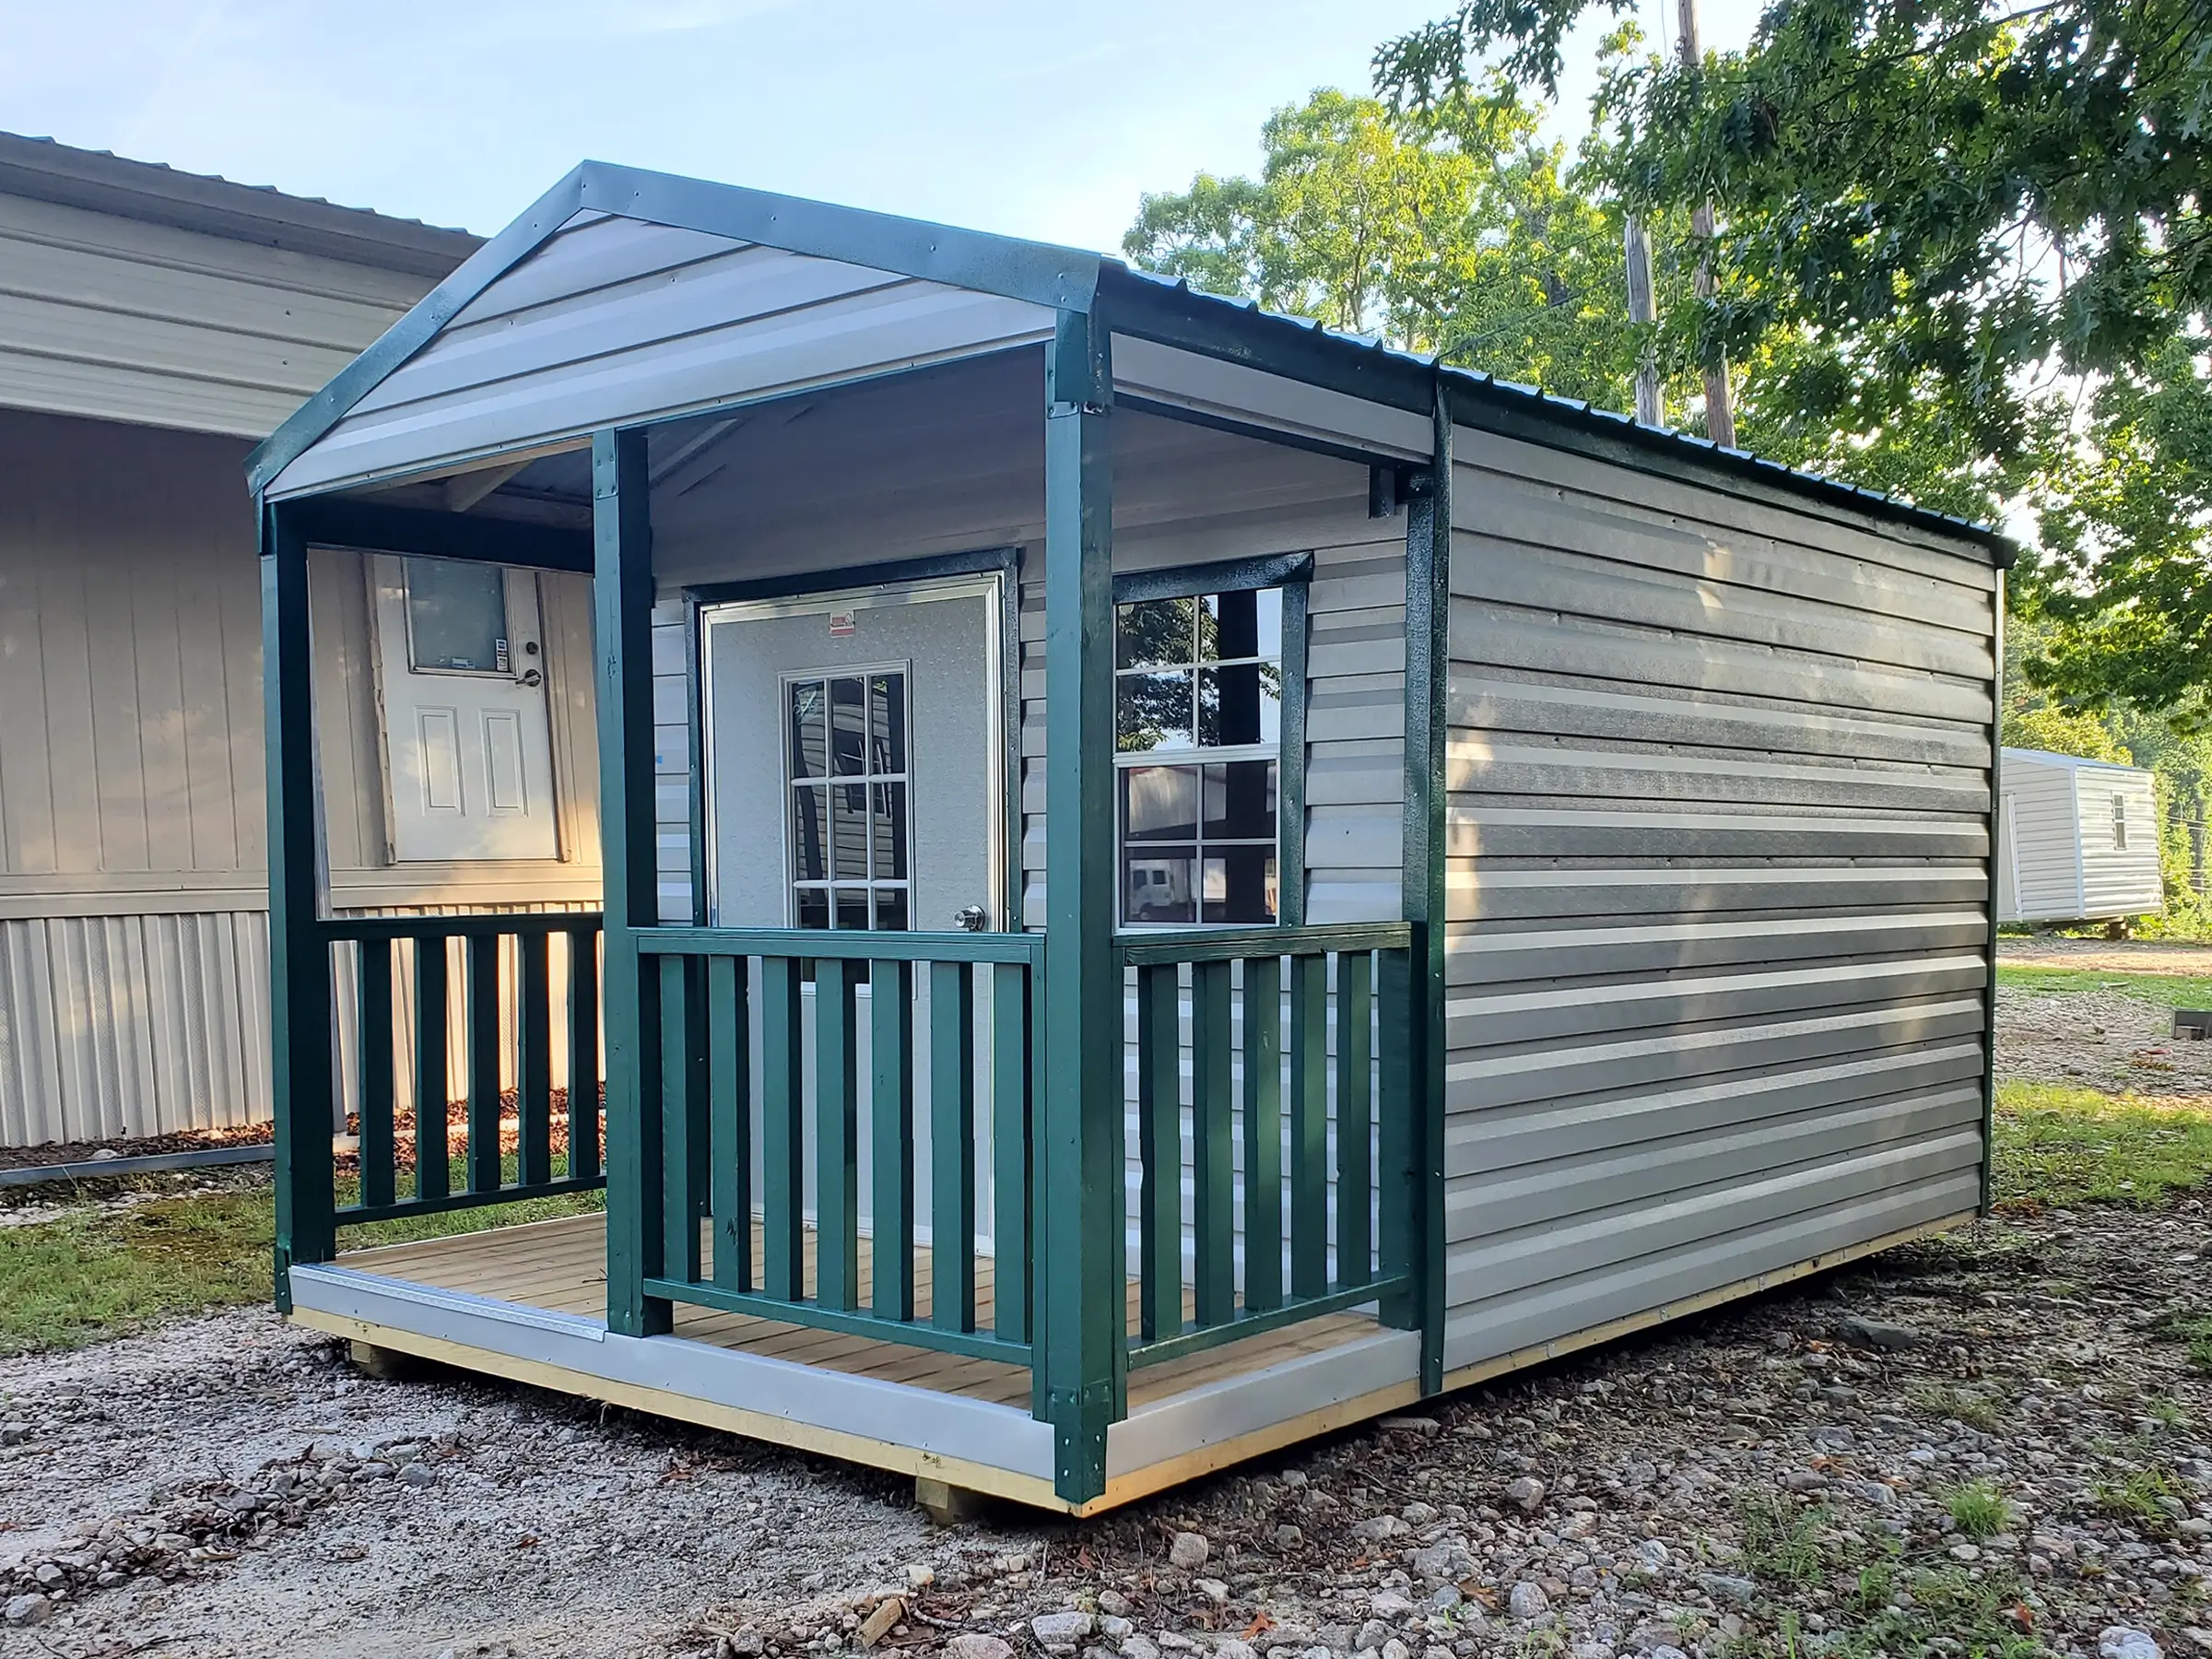 Pictured is a 10x16 portable building with four foot porch on the front with clay siding and green trim